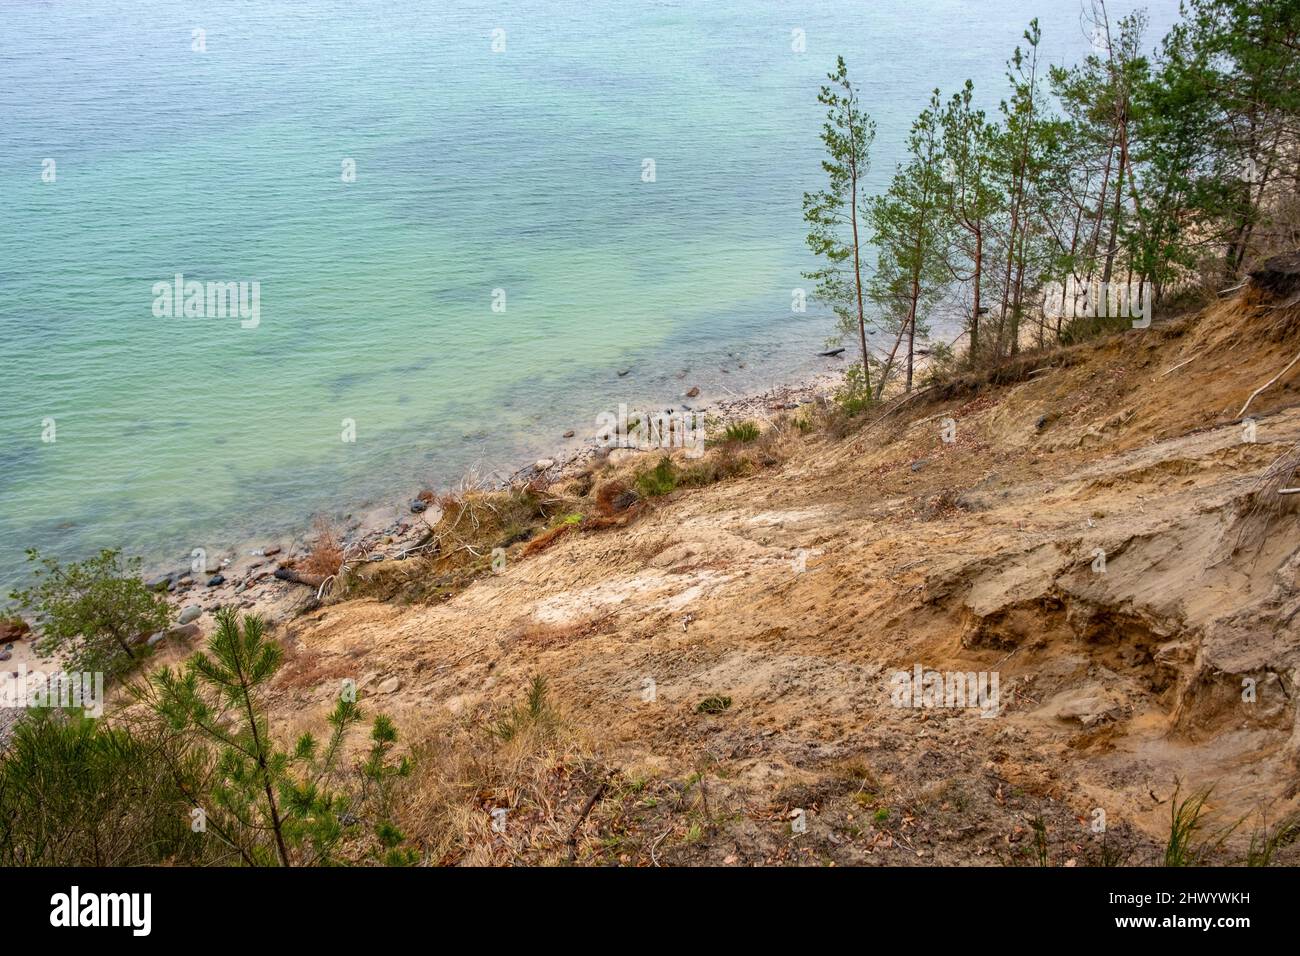 Subsiding slope of Klif Orlowski Cliff - loess steep shore undermined by Baltic Sea waves in Gdynia Orlowo in Pomerania region of Poland Stock Photo